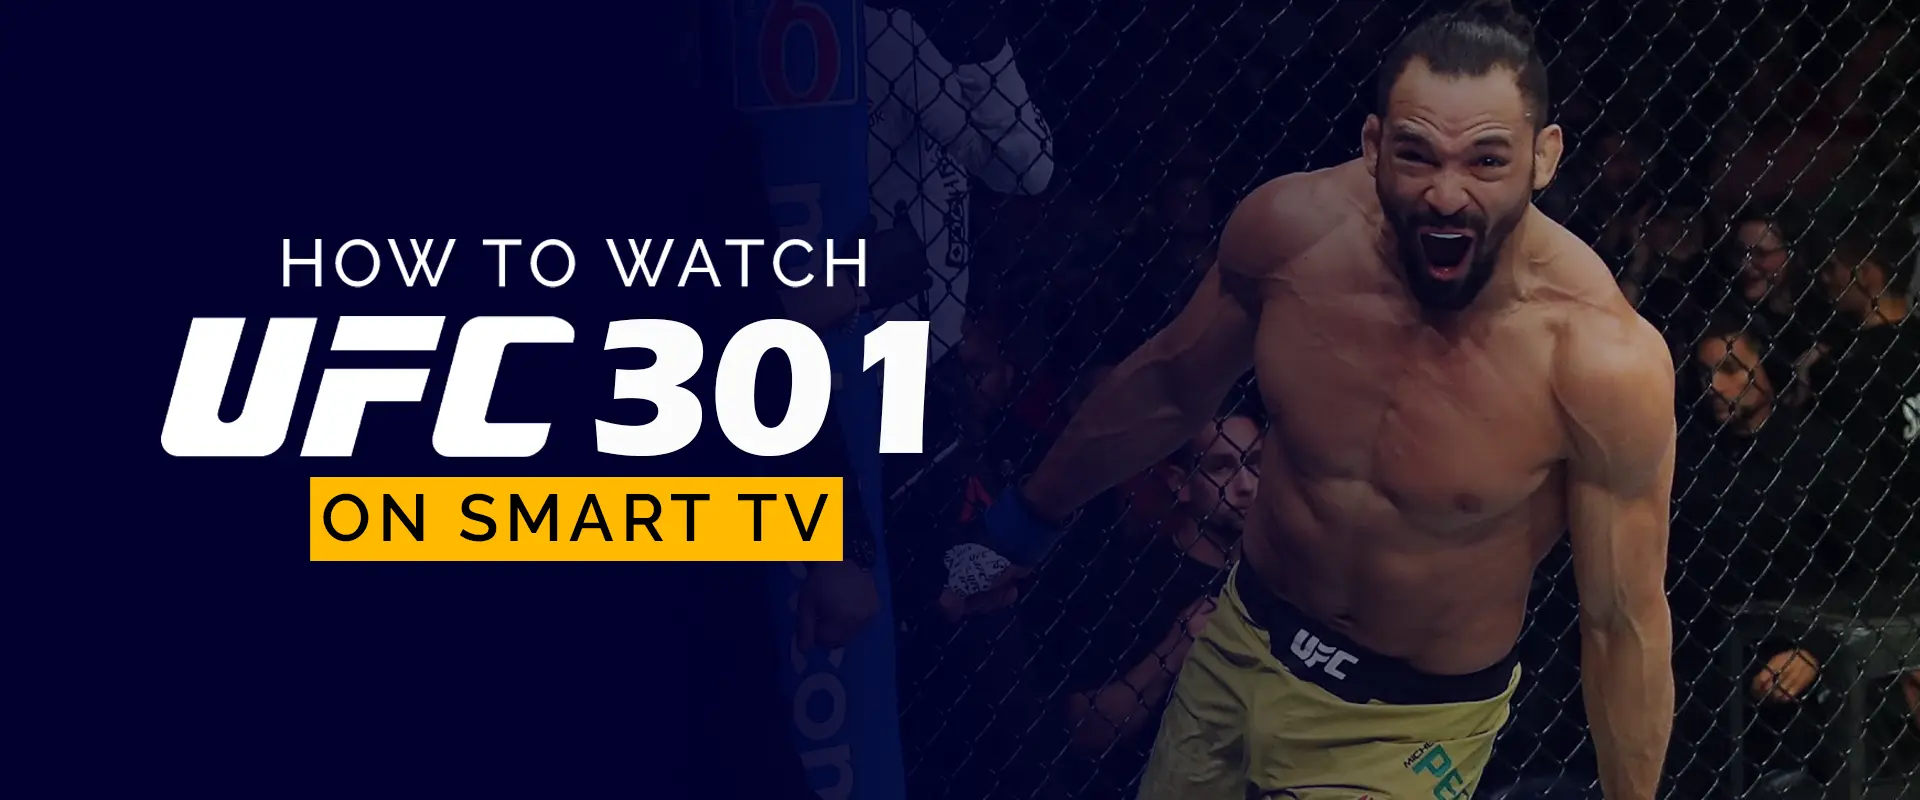 How to Watch UFC 301 on Smart TV